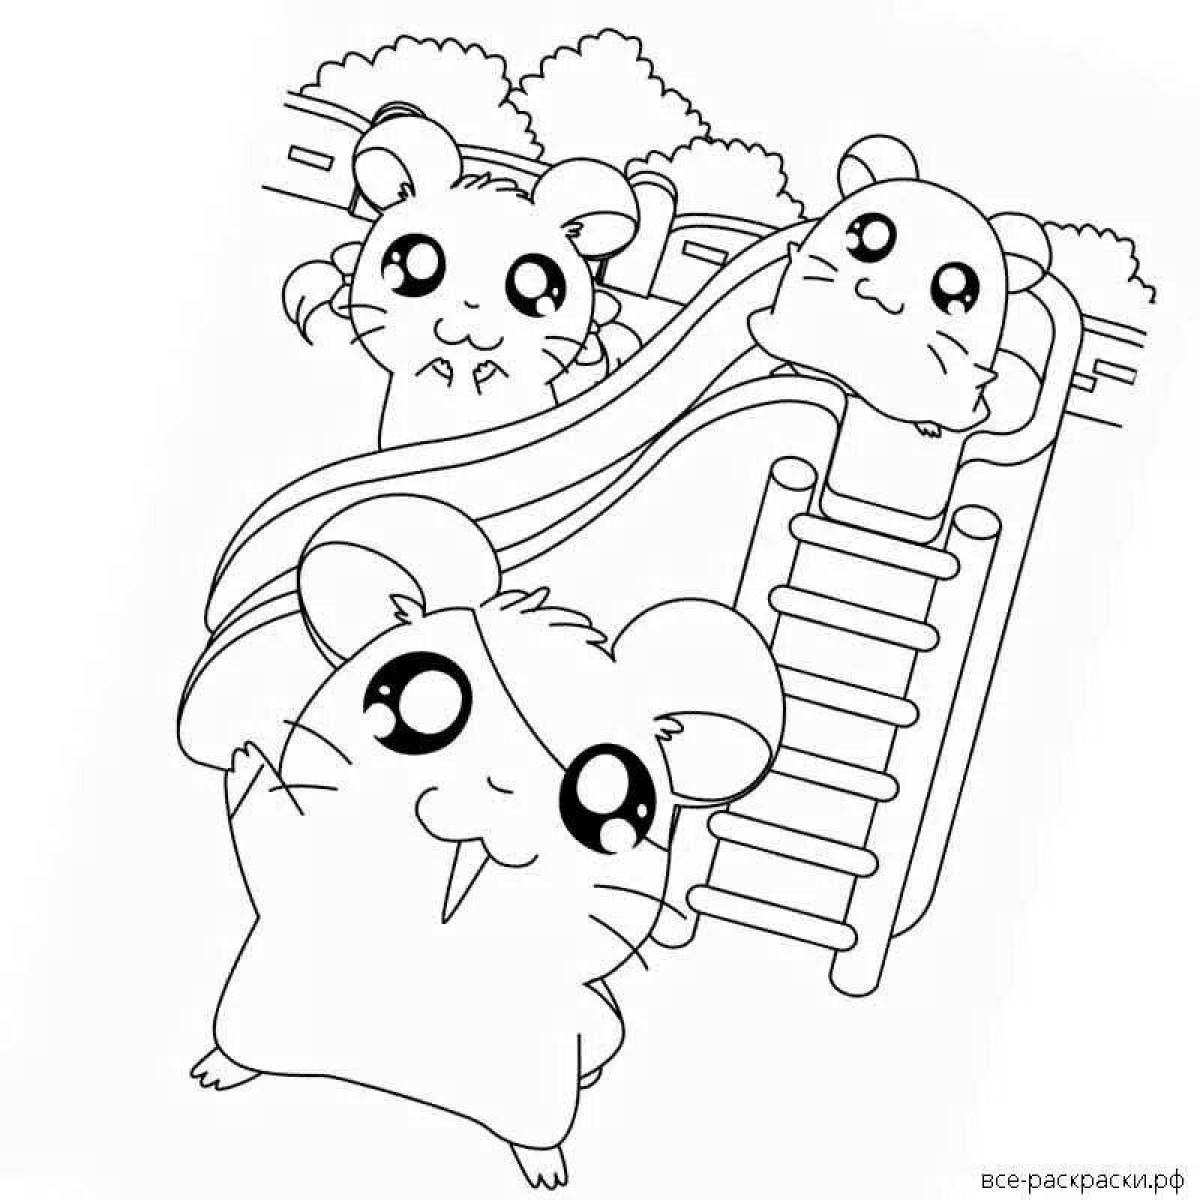 Exciting hamster coloring games